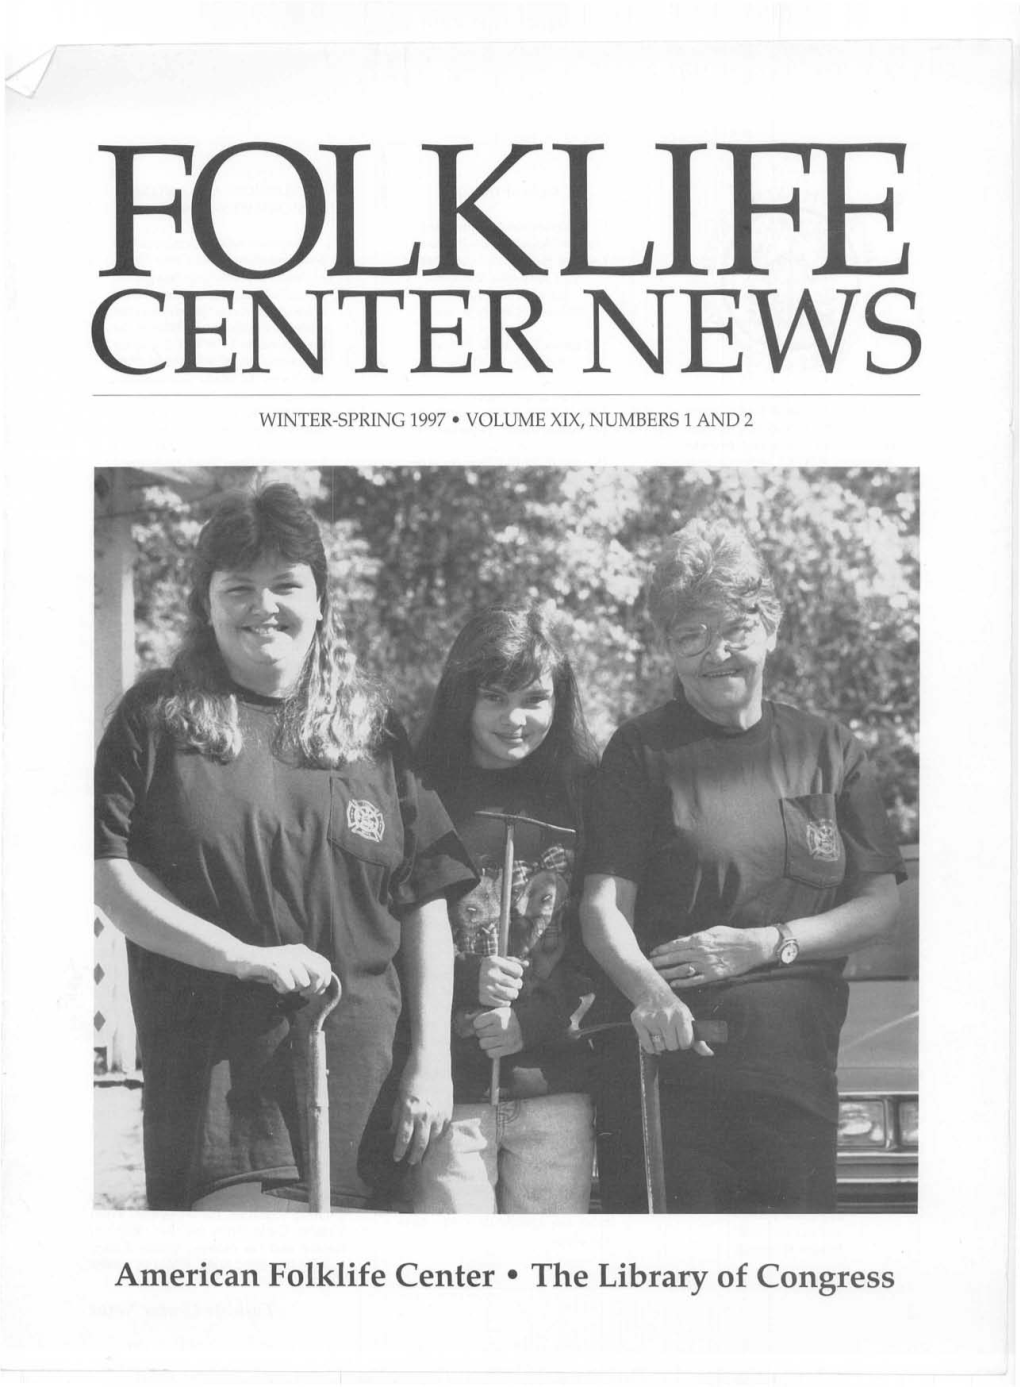 Folklife Center News, Winter-Spring 1997, Volume XIX, Numbers 1 and 2